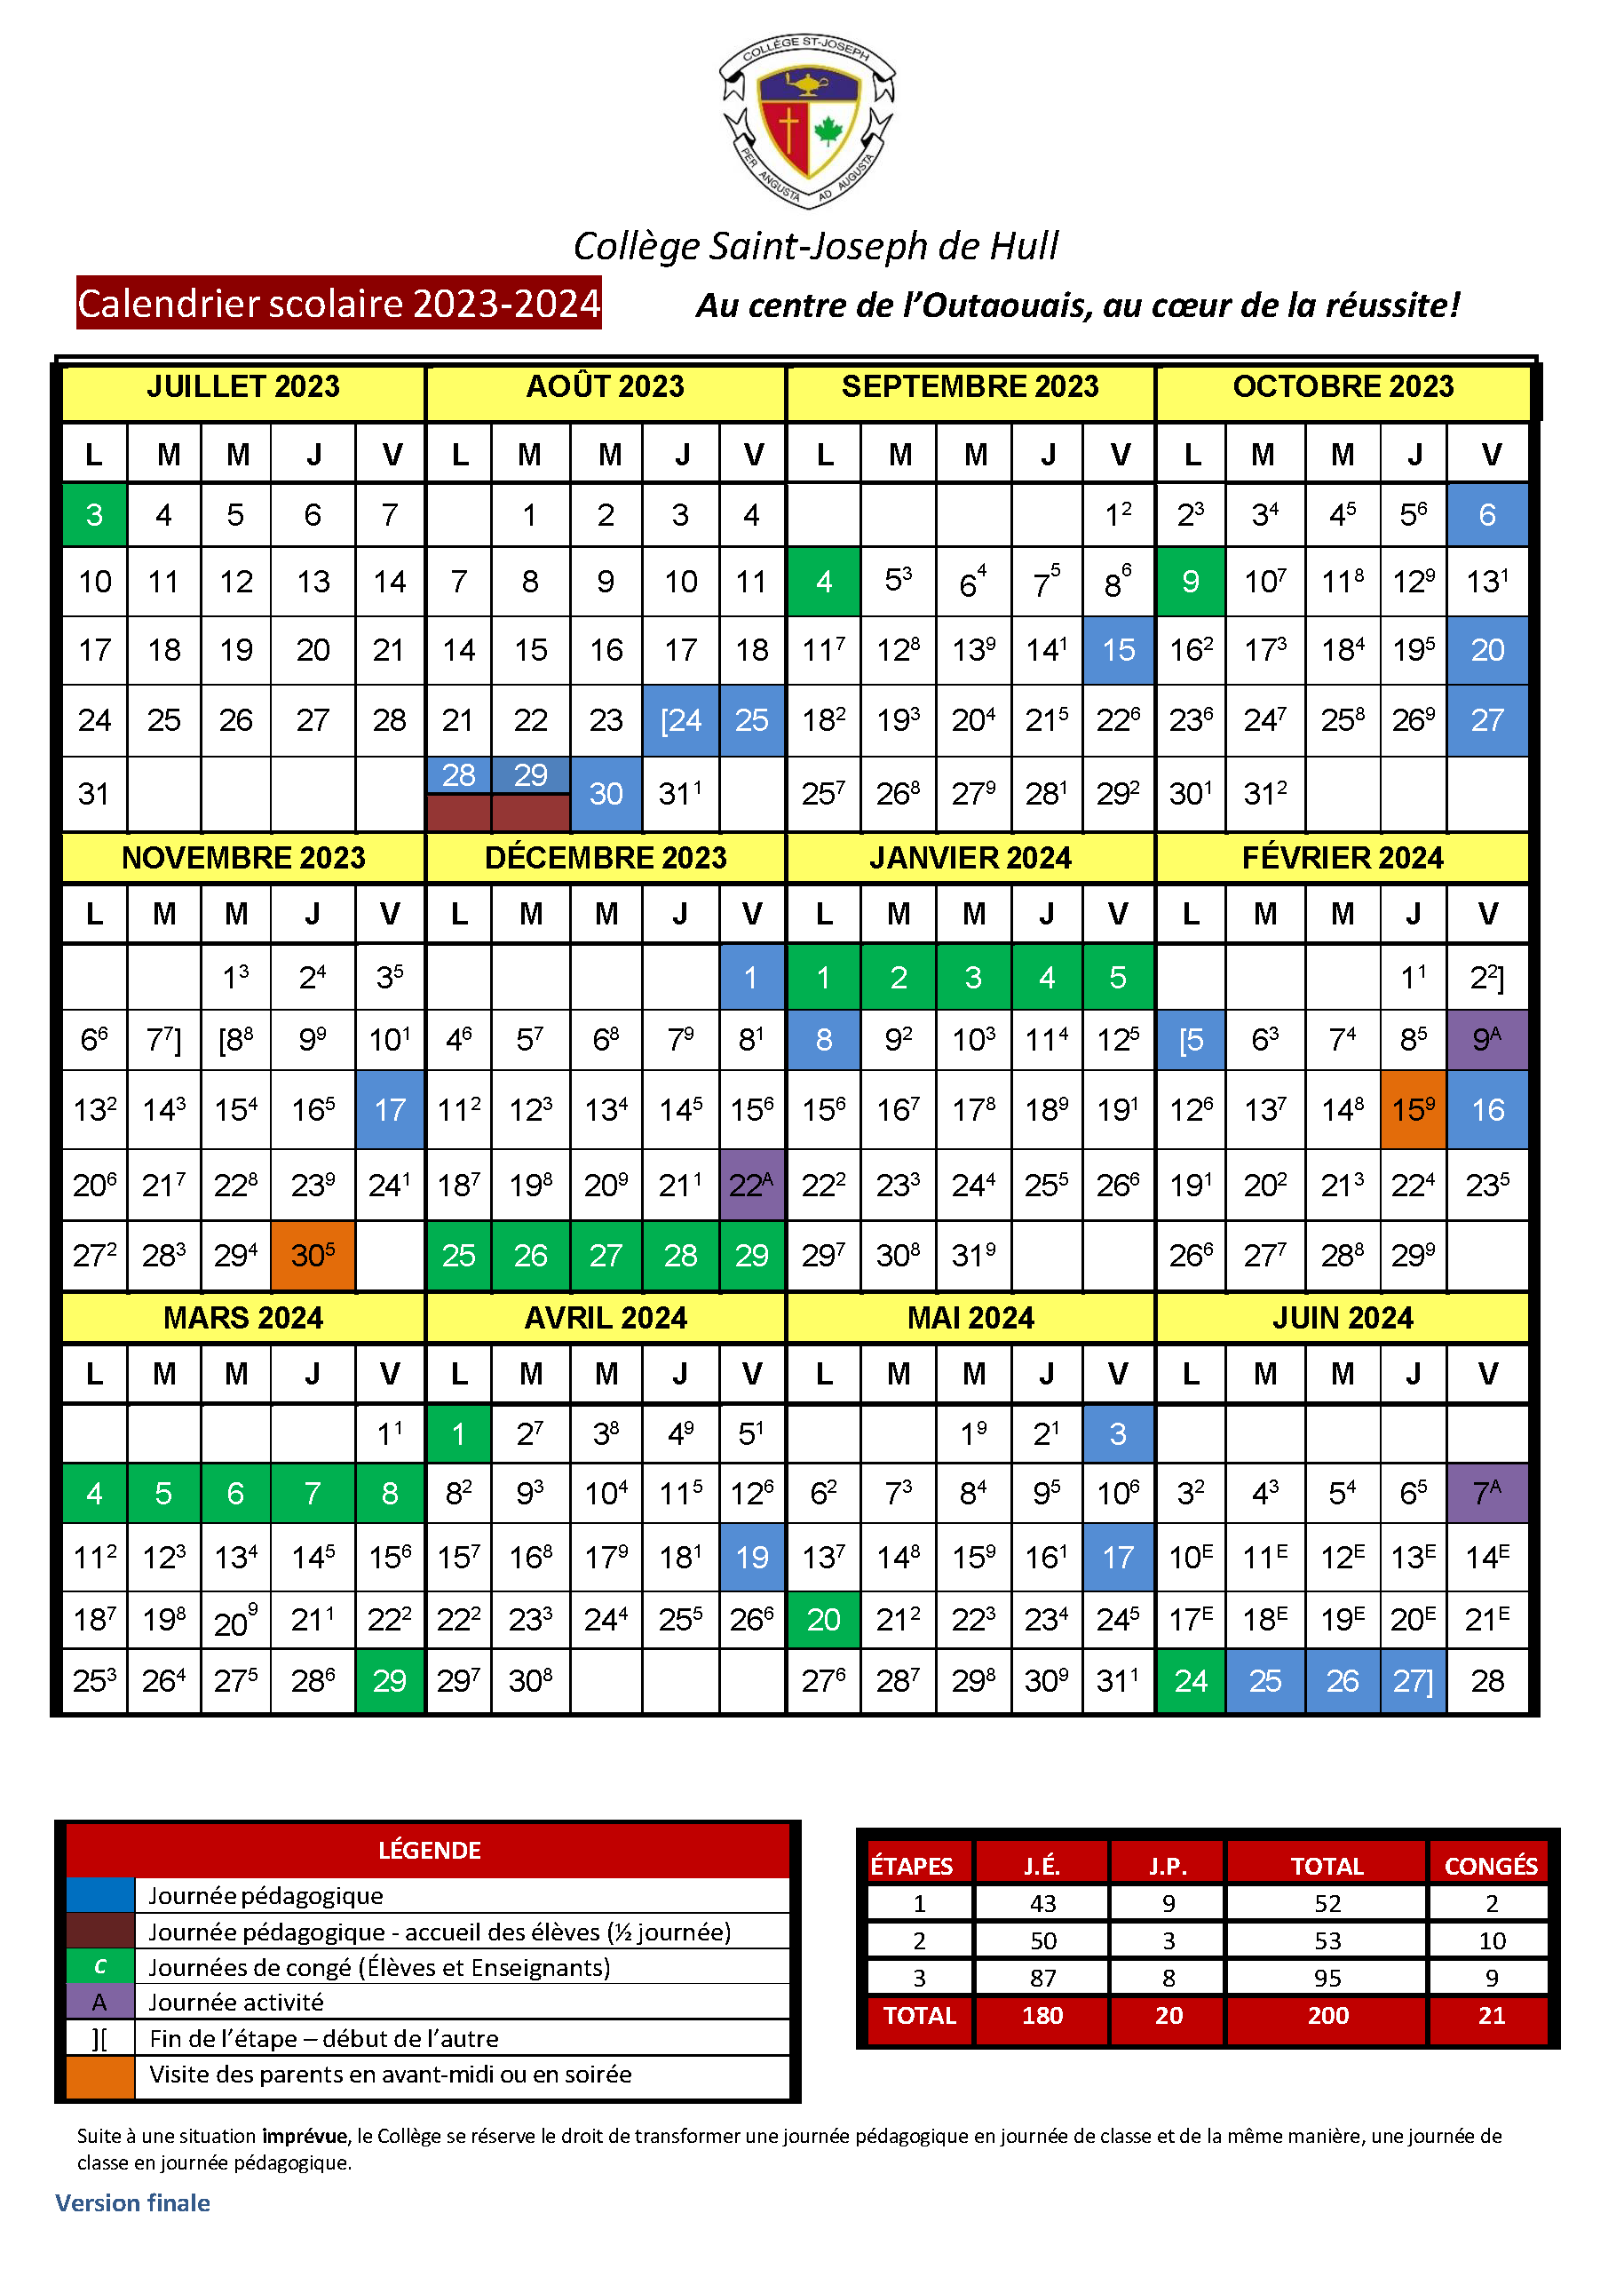 Calendrier scolaire  final 2023-2024.png